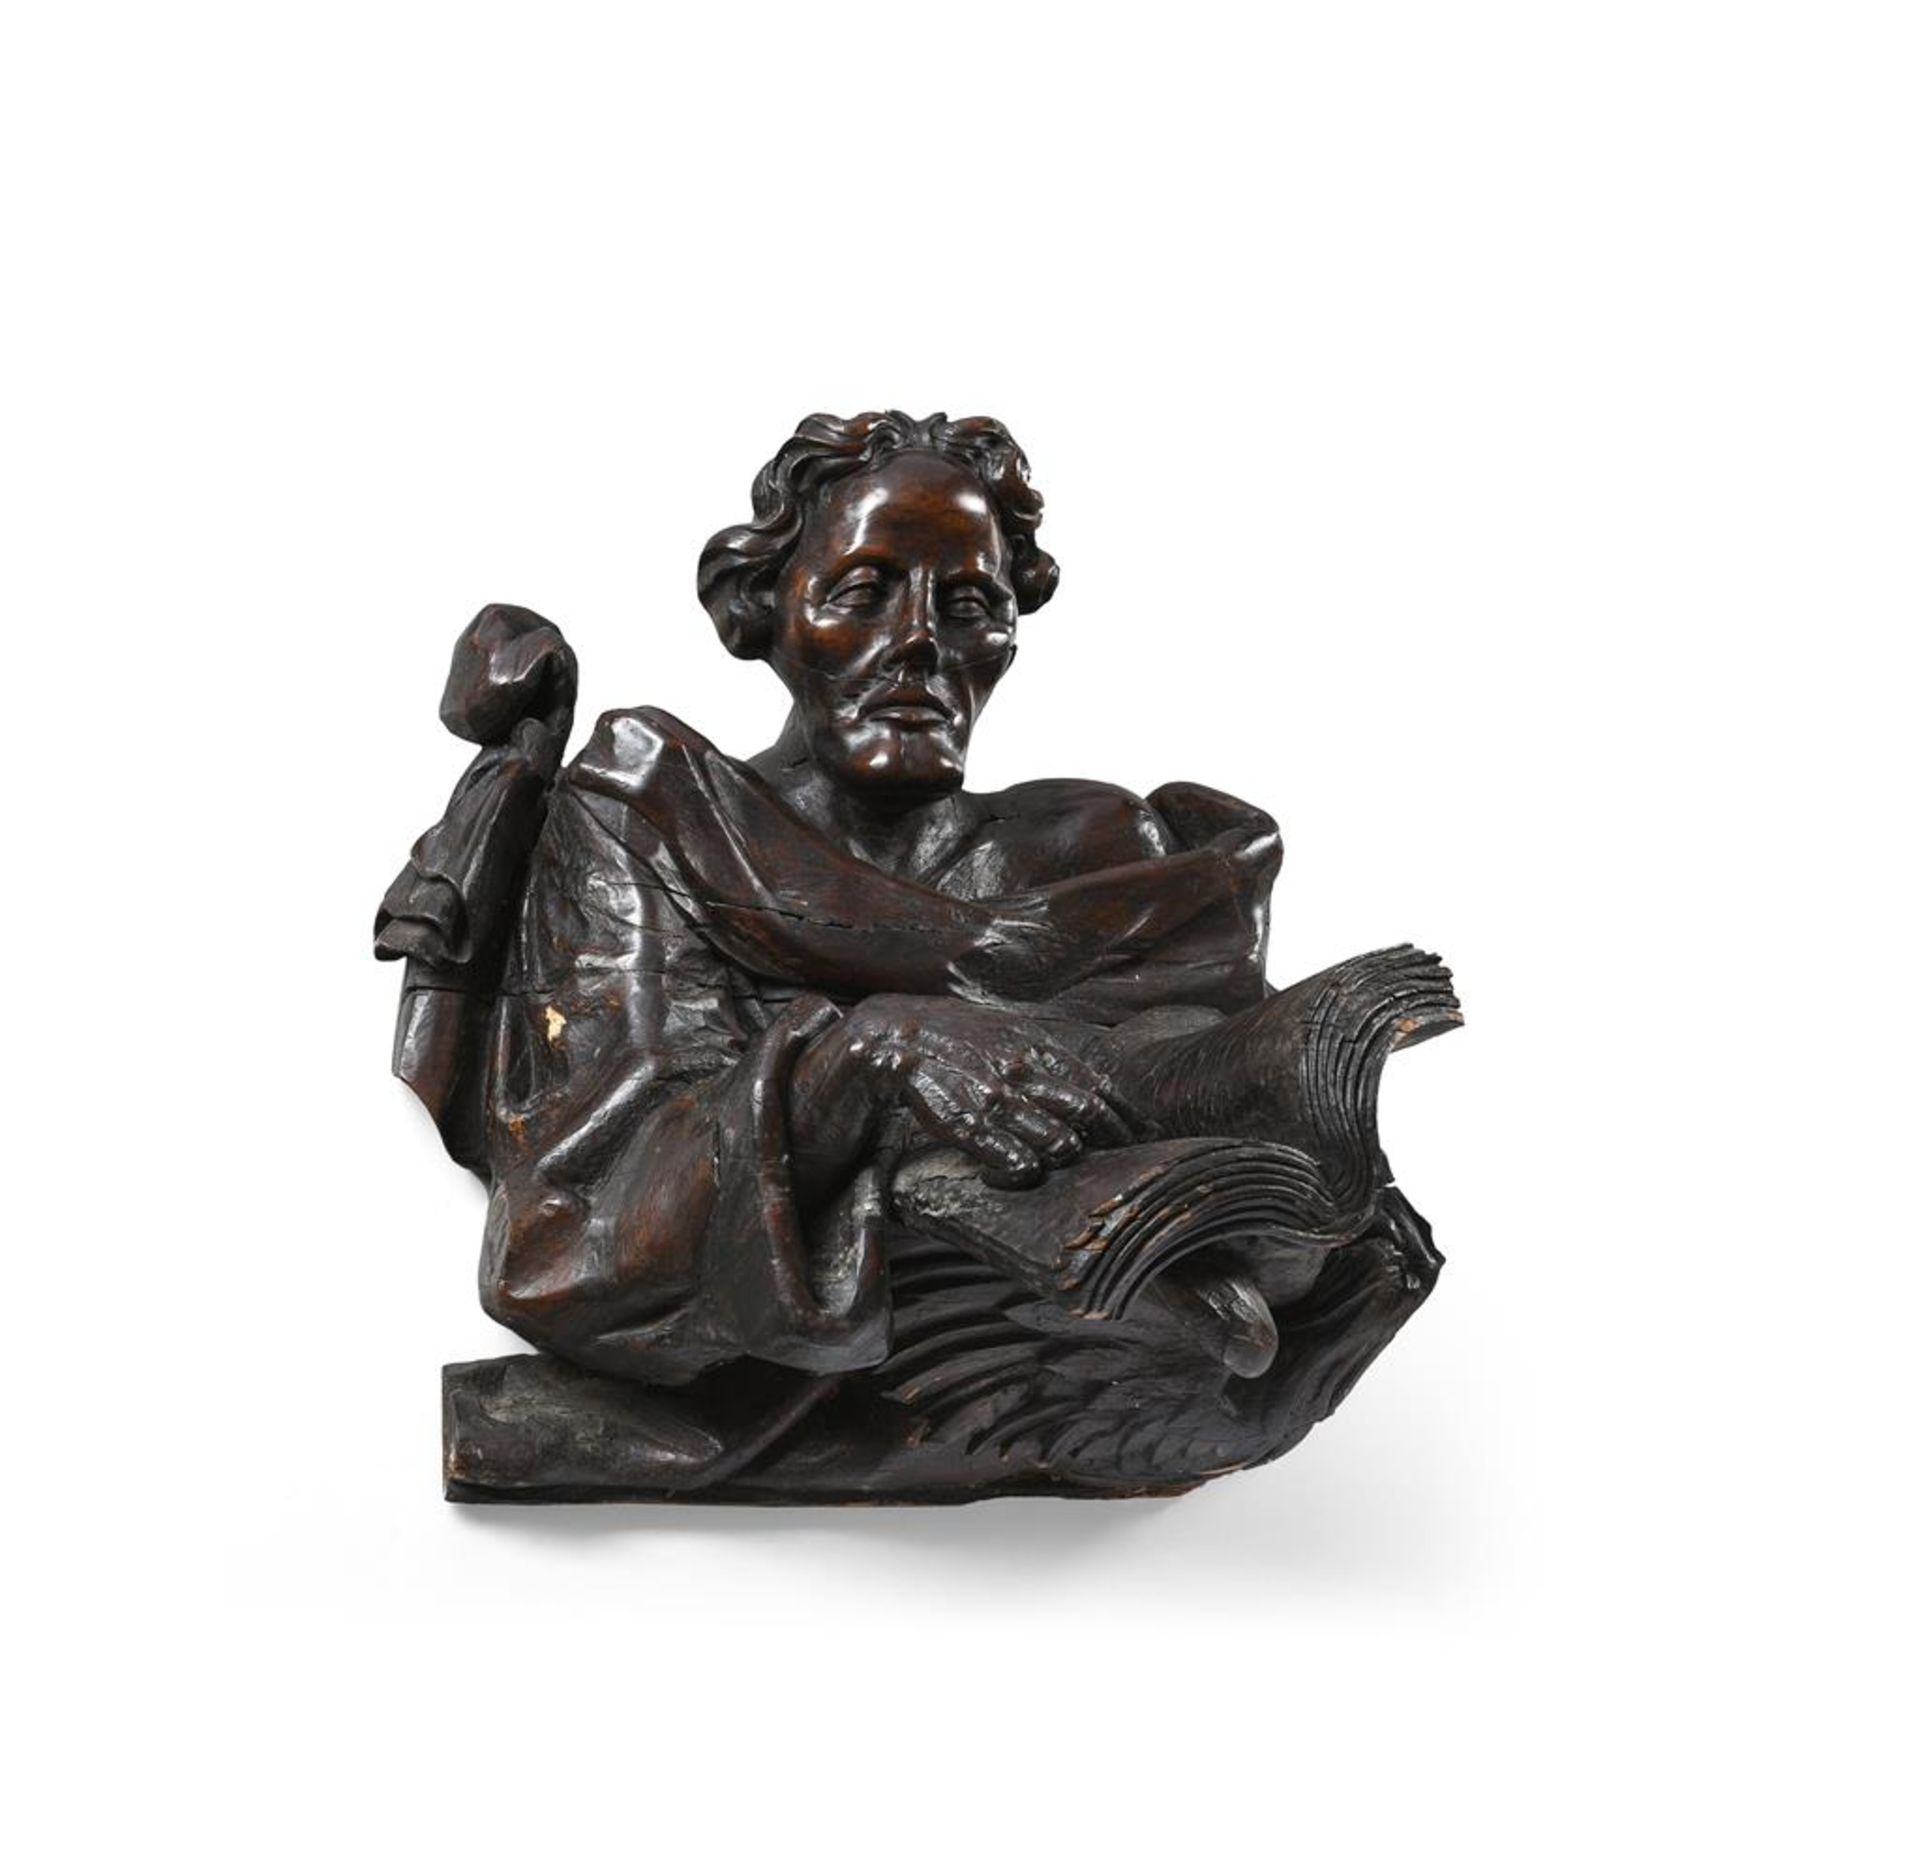 A CARVED WOODEN BUST FIGURE OF ST JOHN THE EVANGELIST, LATE 17TH OR EARLY 18TH CENTURY